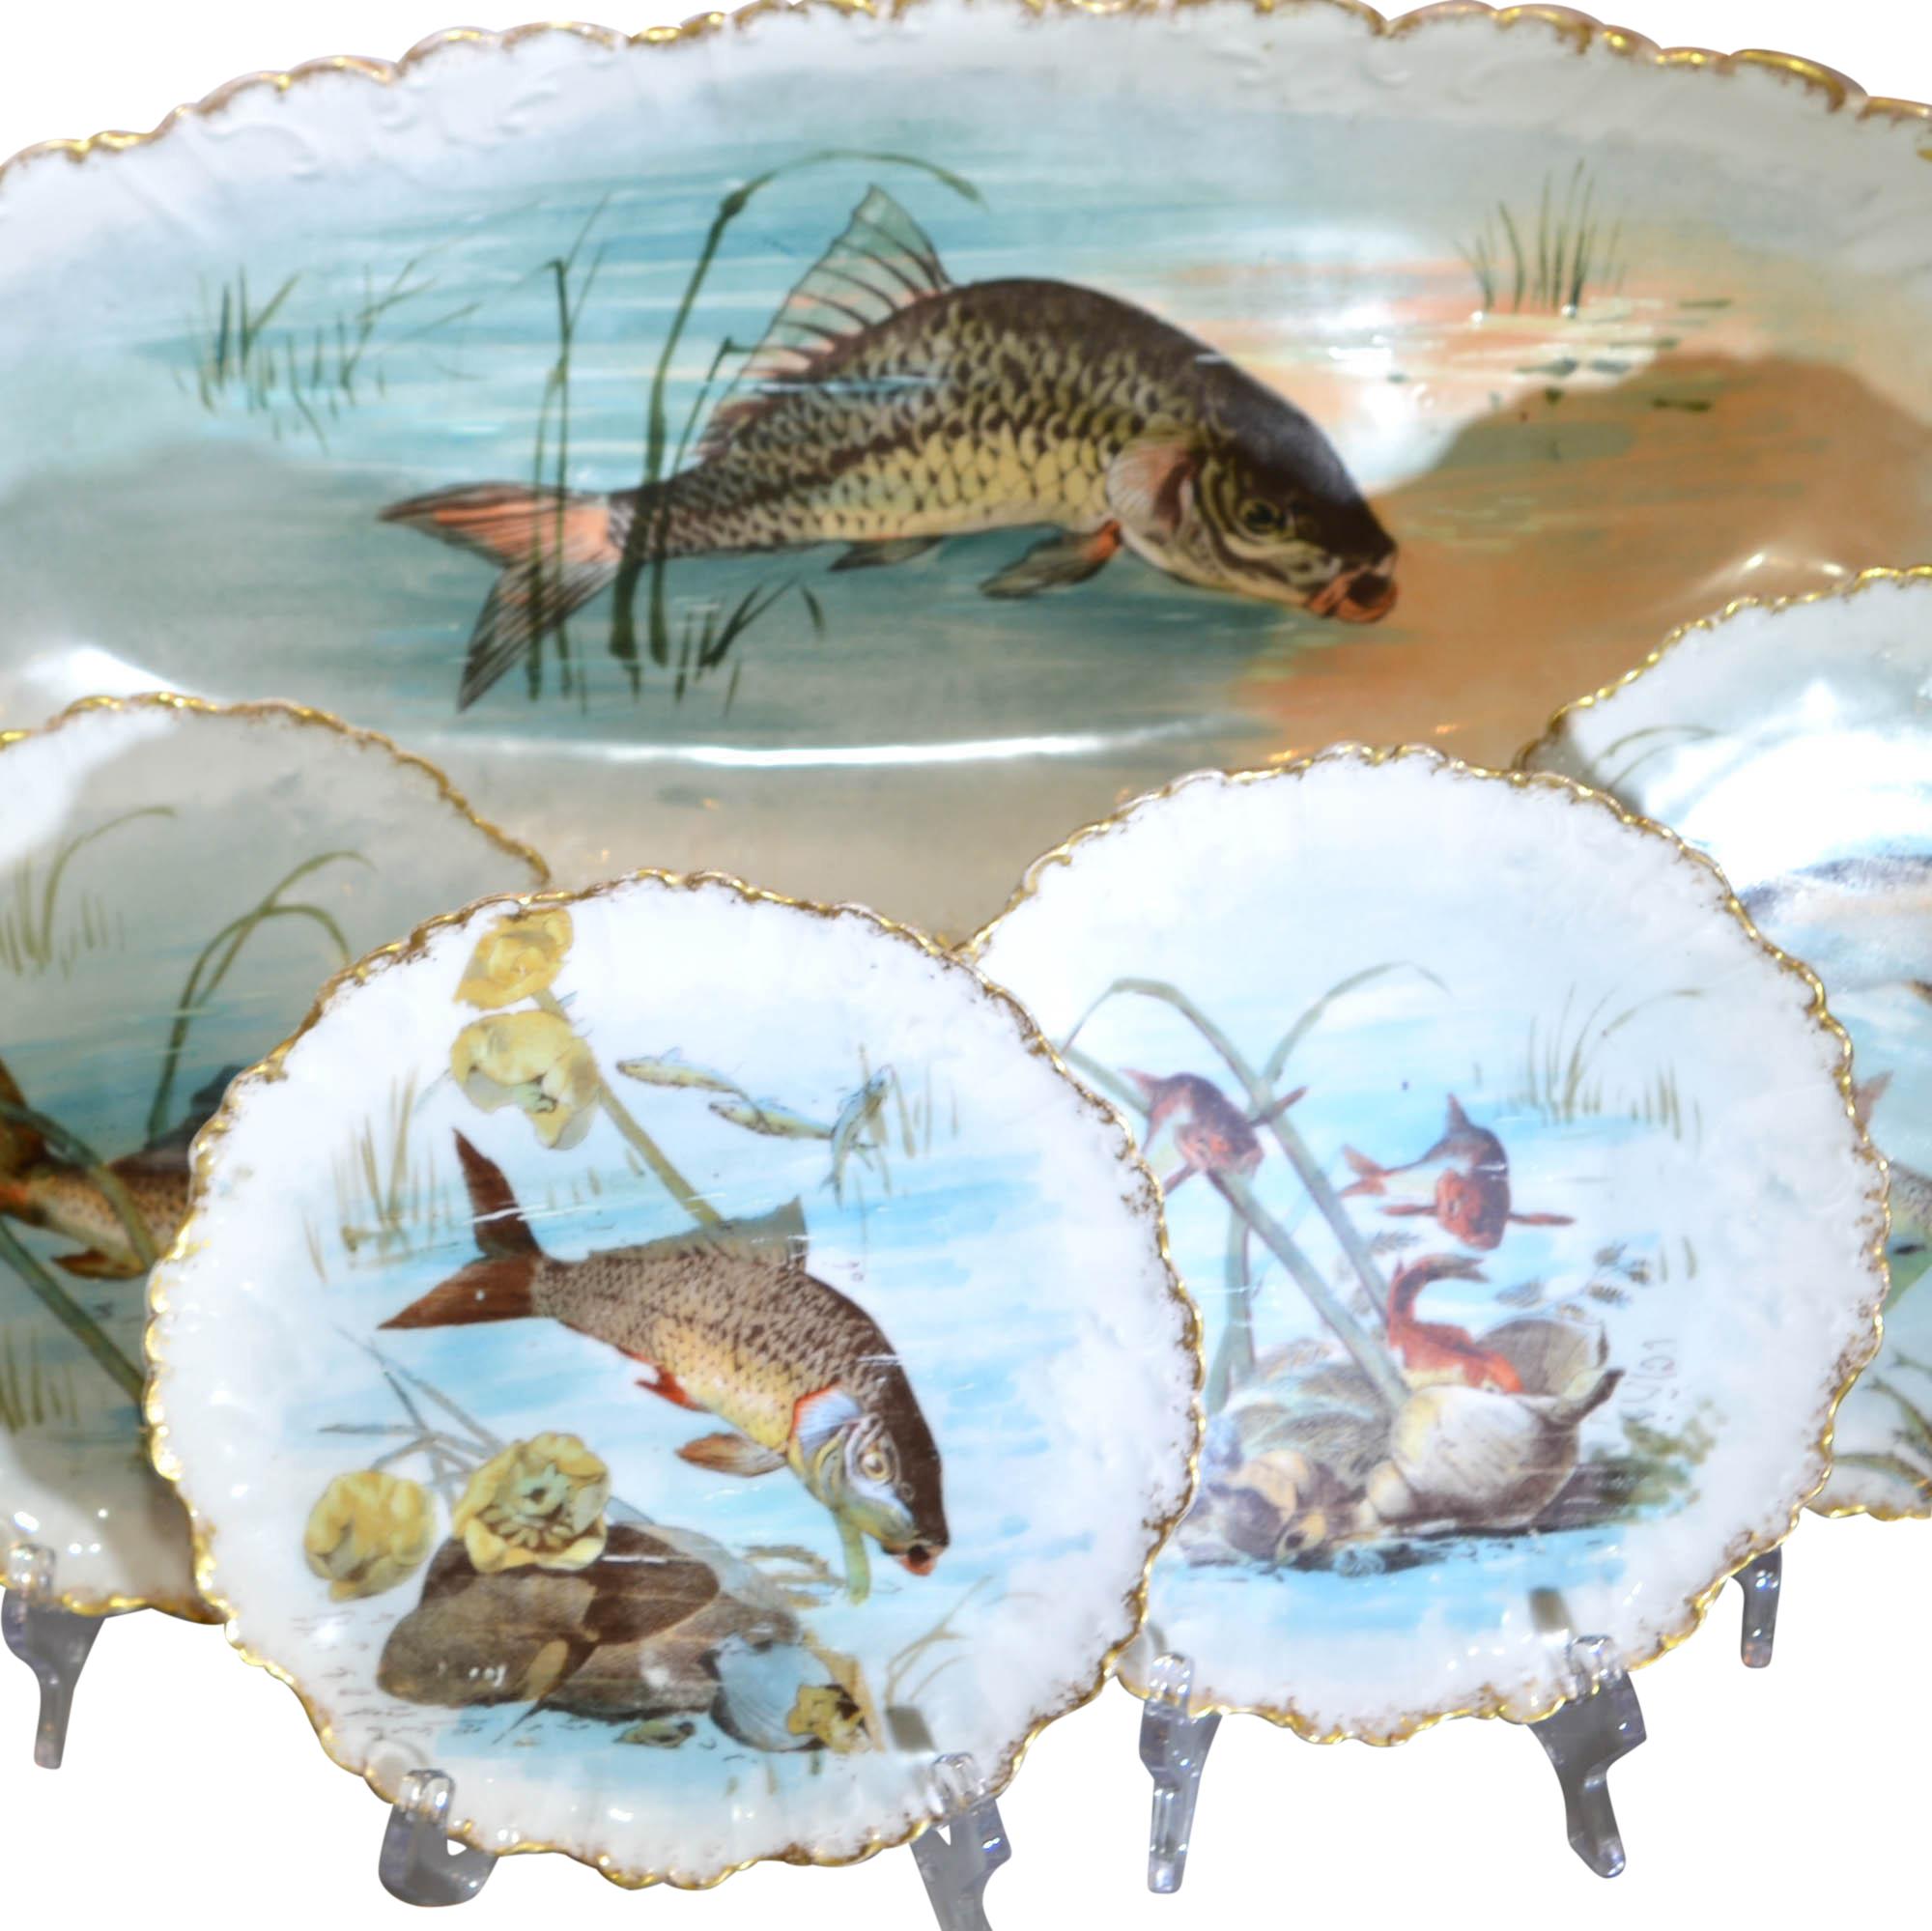 These beautifully hand painted limoges porcelain pieces are sure to get the dinner conversation started. In addition to the detailed center design, the edges feature gold trim details. The set include 12 plates, one large oval platter, and one sauce